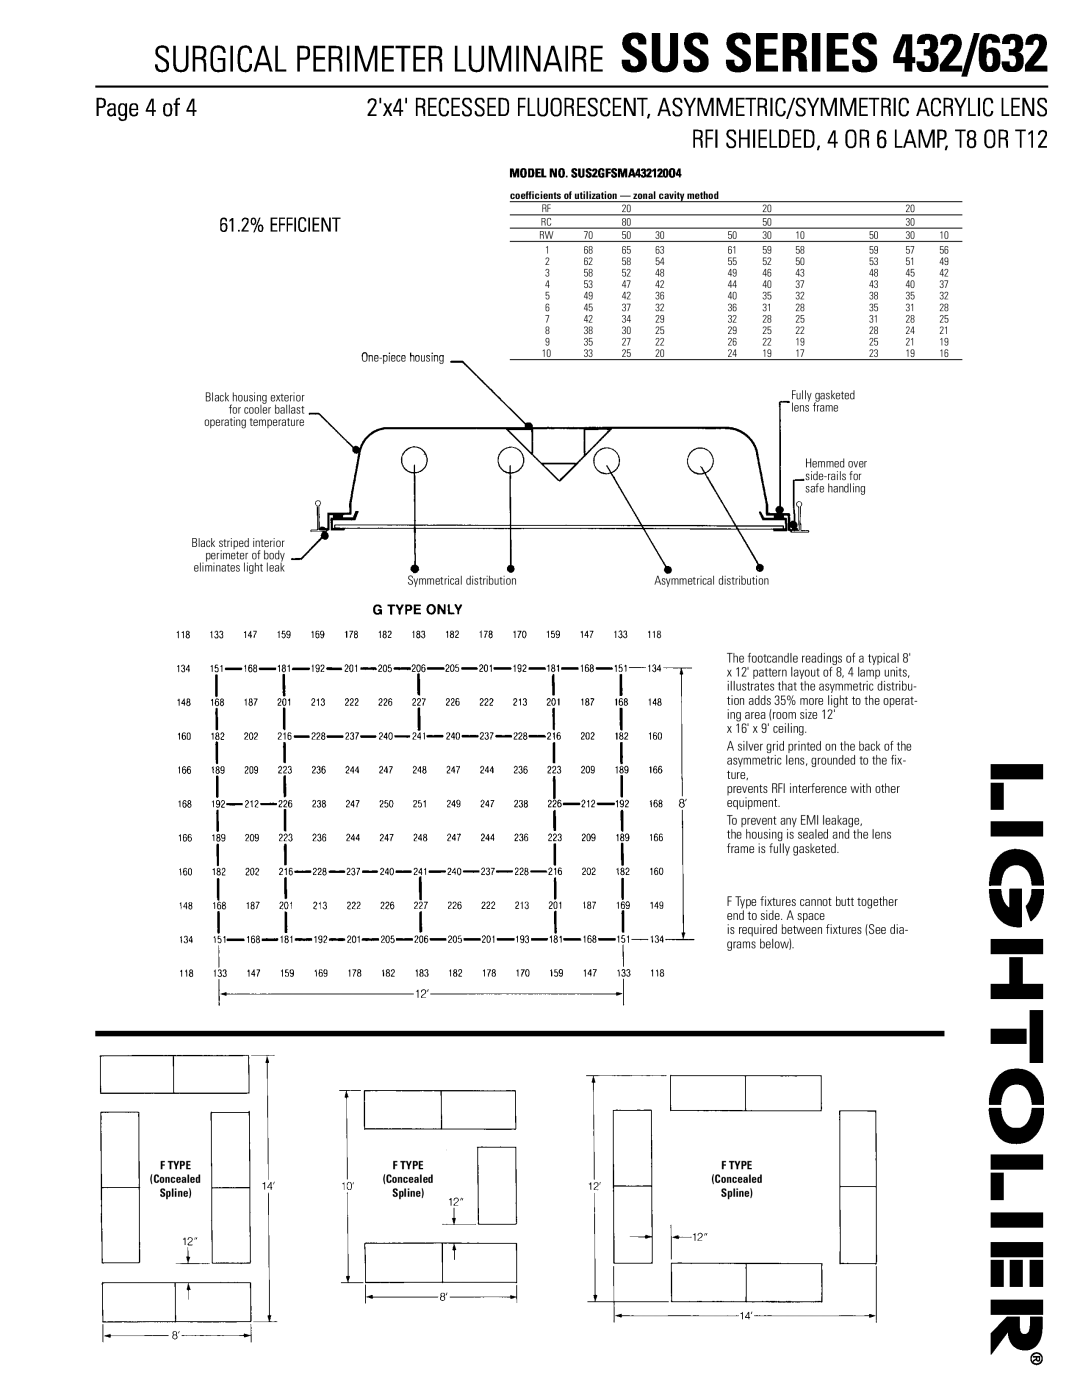 Lightolier dimensions Page 4 of, 61.2% EFFICIENT, SURGICAL PERIMETER LUMINAIRE SUS SERIES 432/632, x 16 x 9 ceiling 